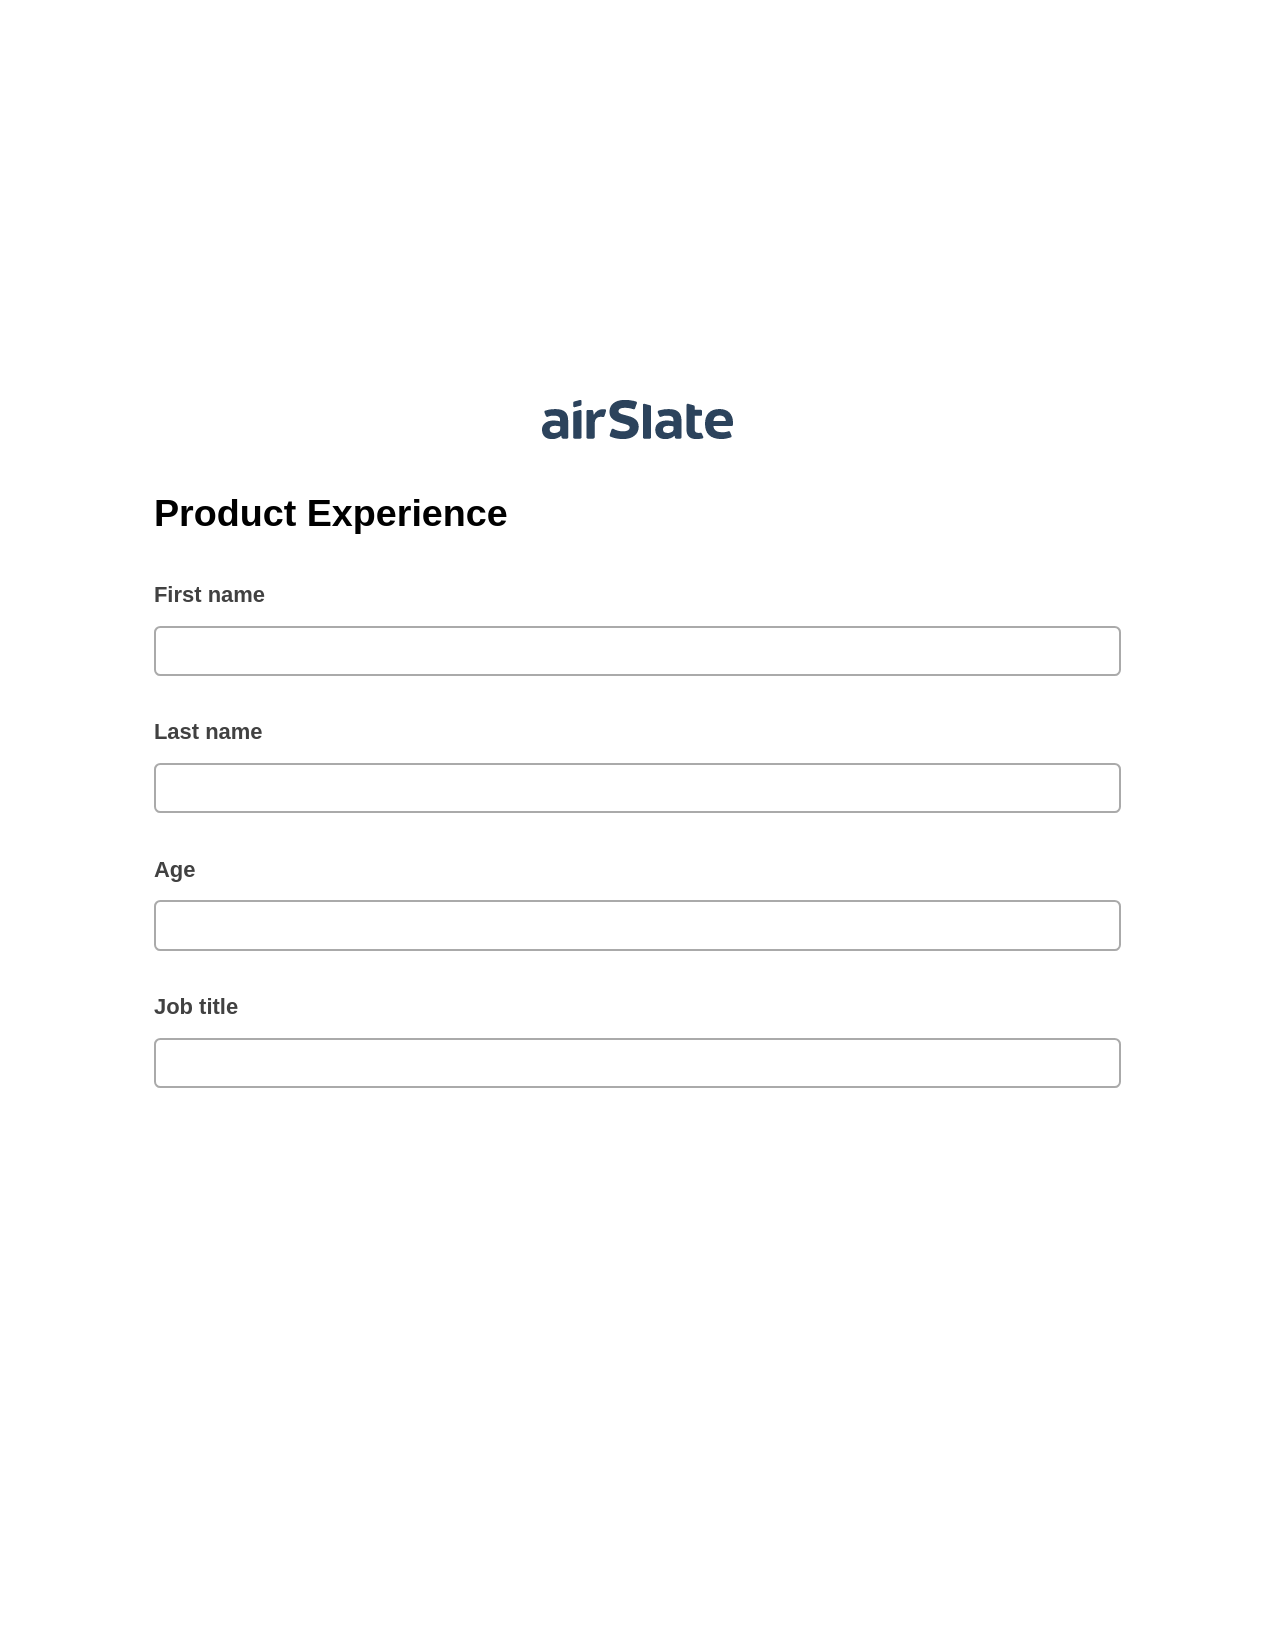 Product Experience Pre-fill from MS Dynamics 365 Records, Reminder Bot, Archive to Google Drive Bot